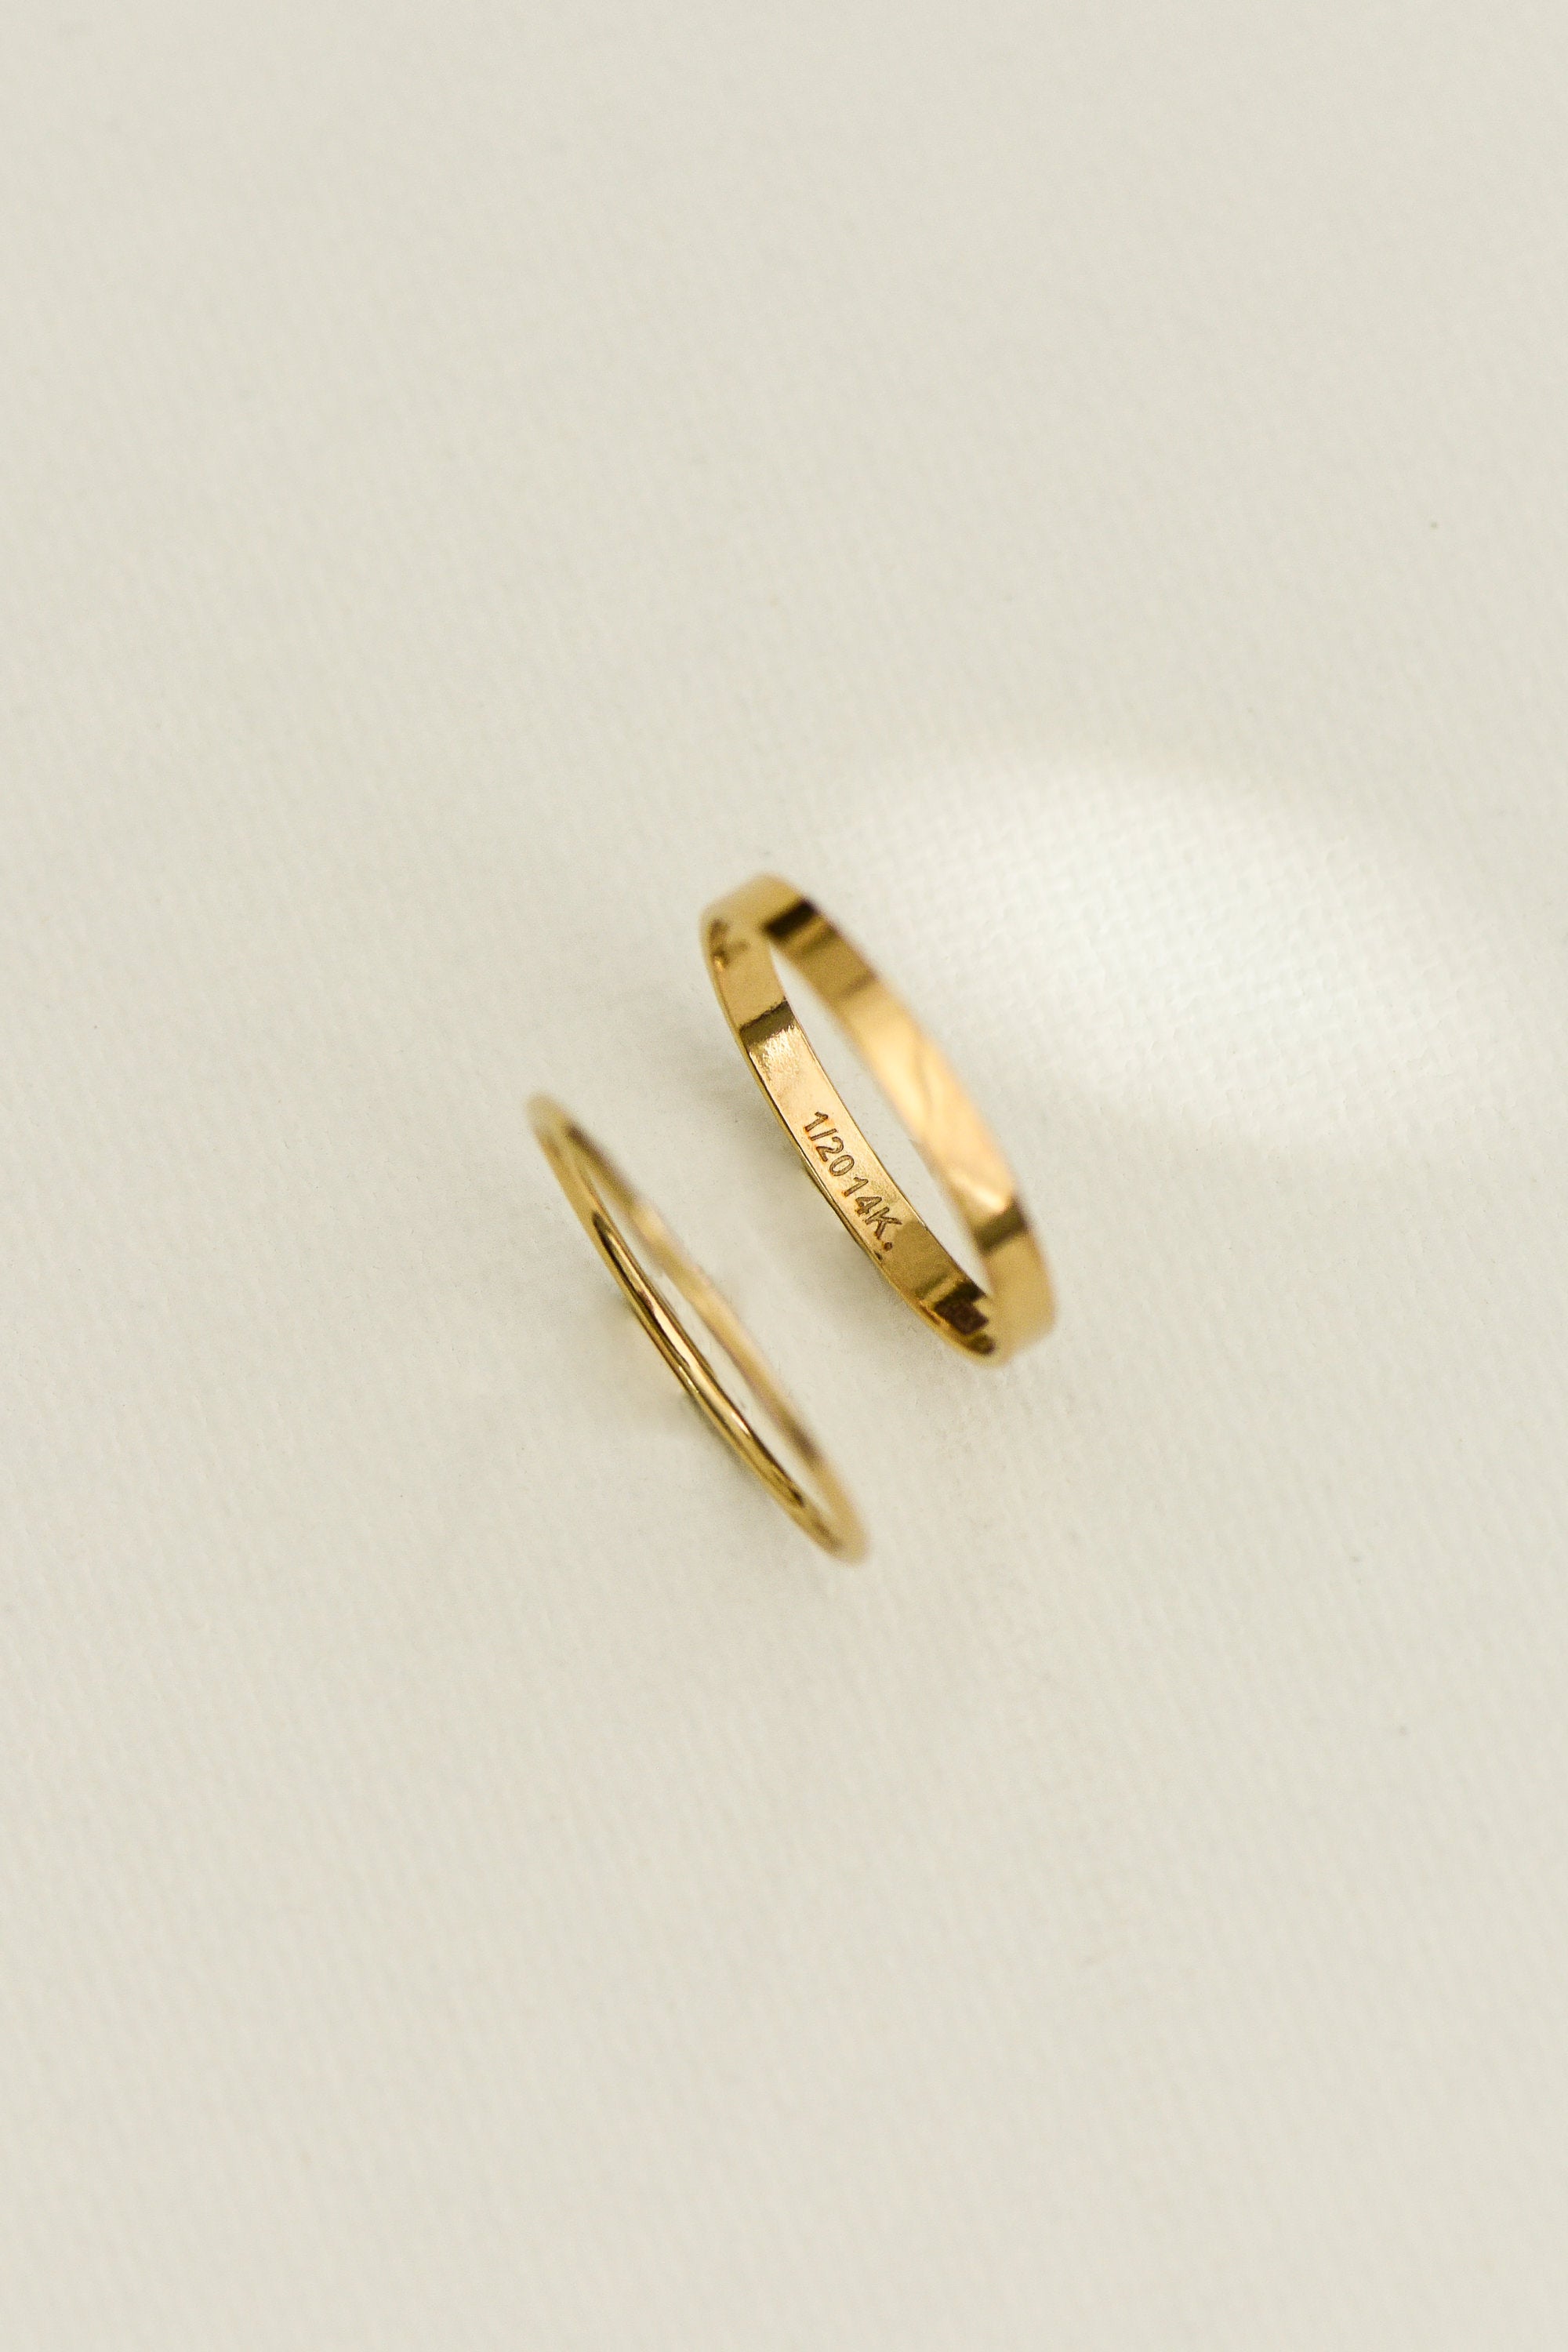 Minimalist Wide Stacking Ring 14k Gold Filled White Background